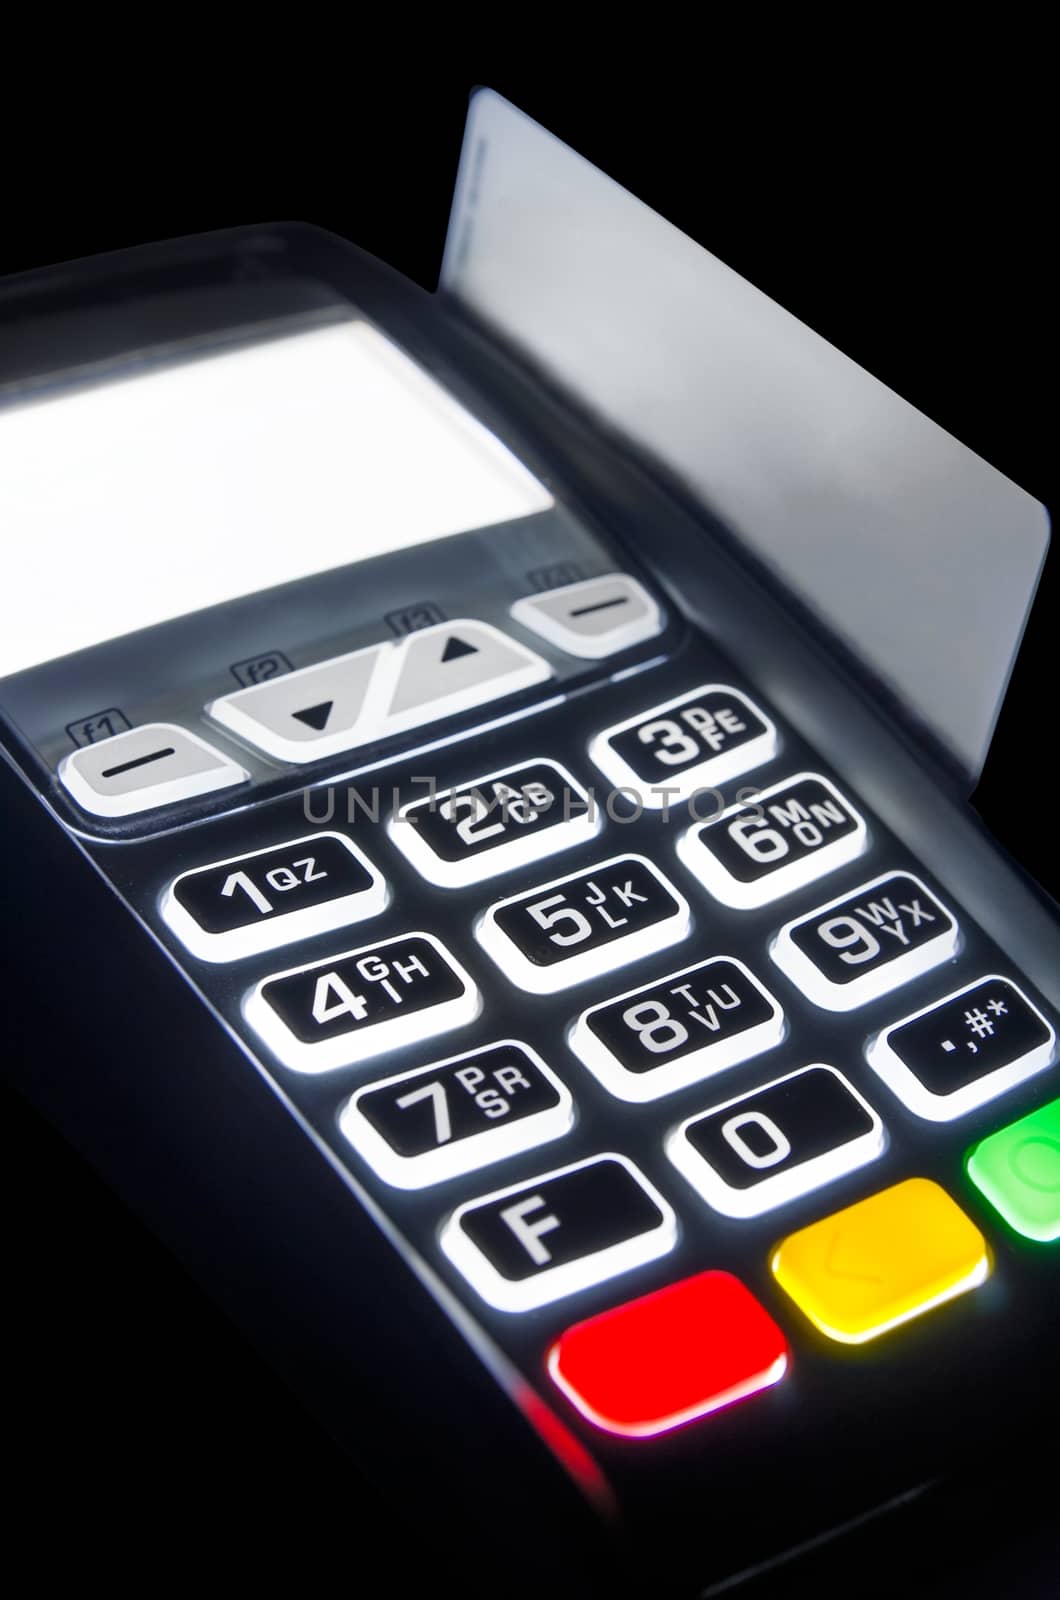 Payment terminal with lighting keypad at night by simpson33